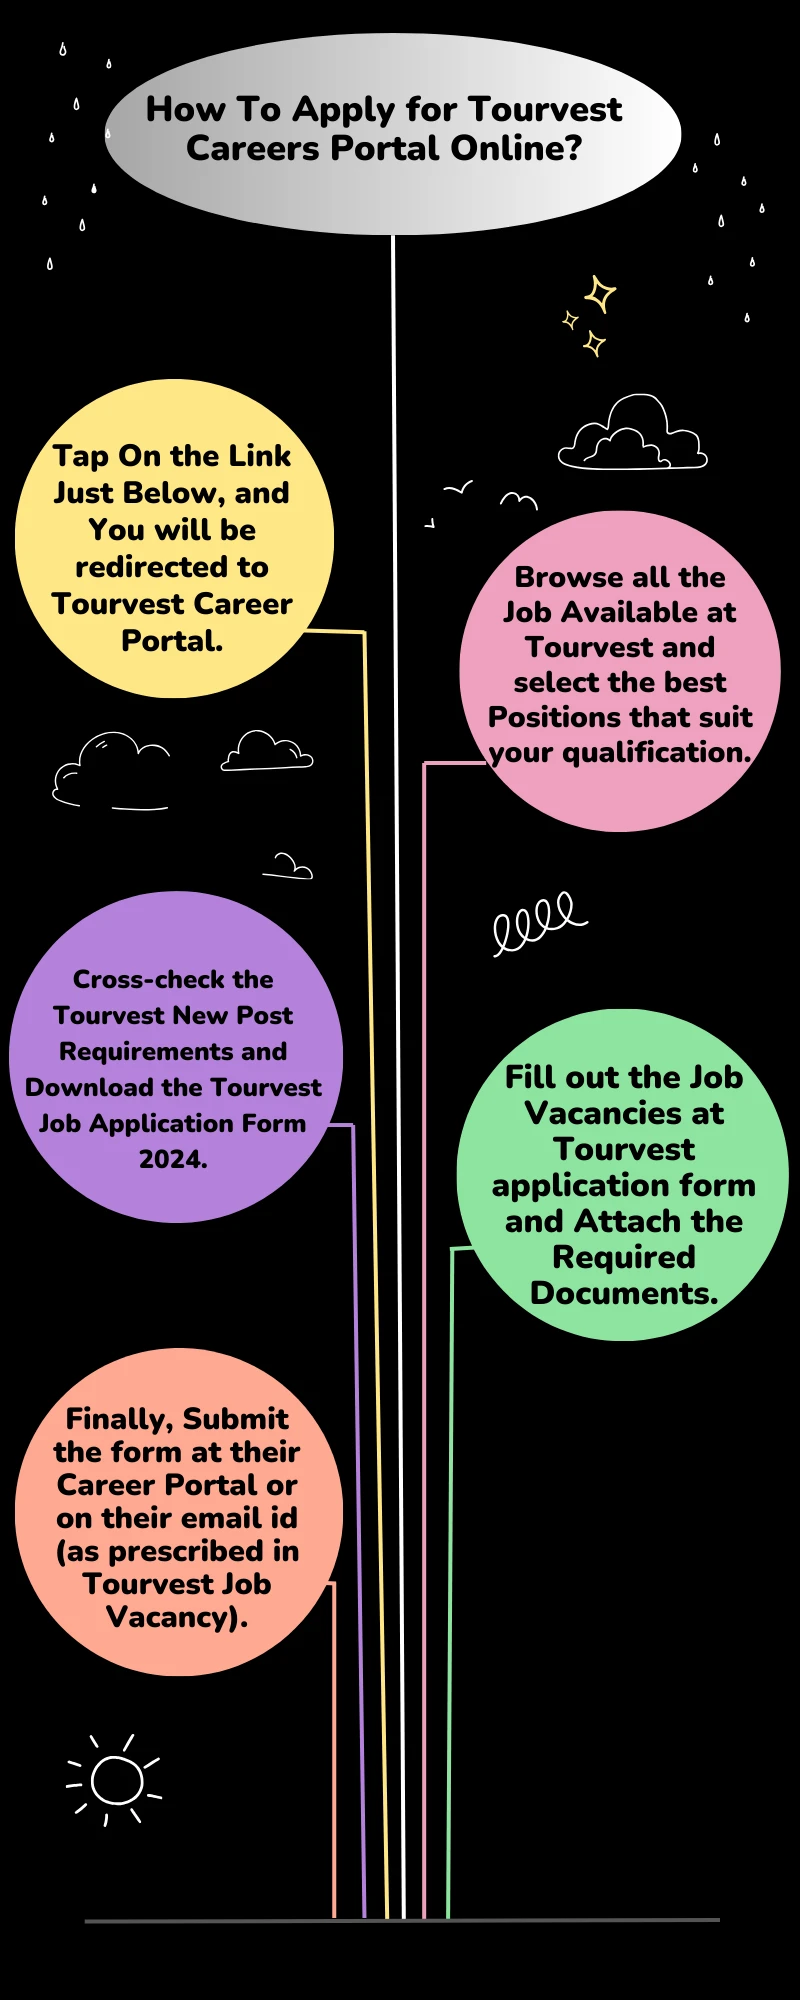 How To Apply for Tourvest Careers Portal Online?